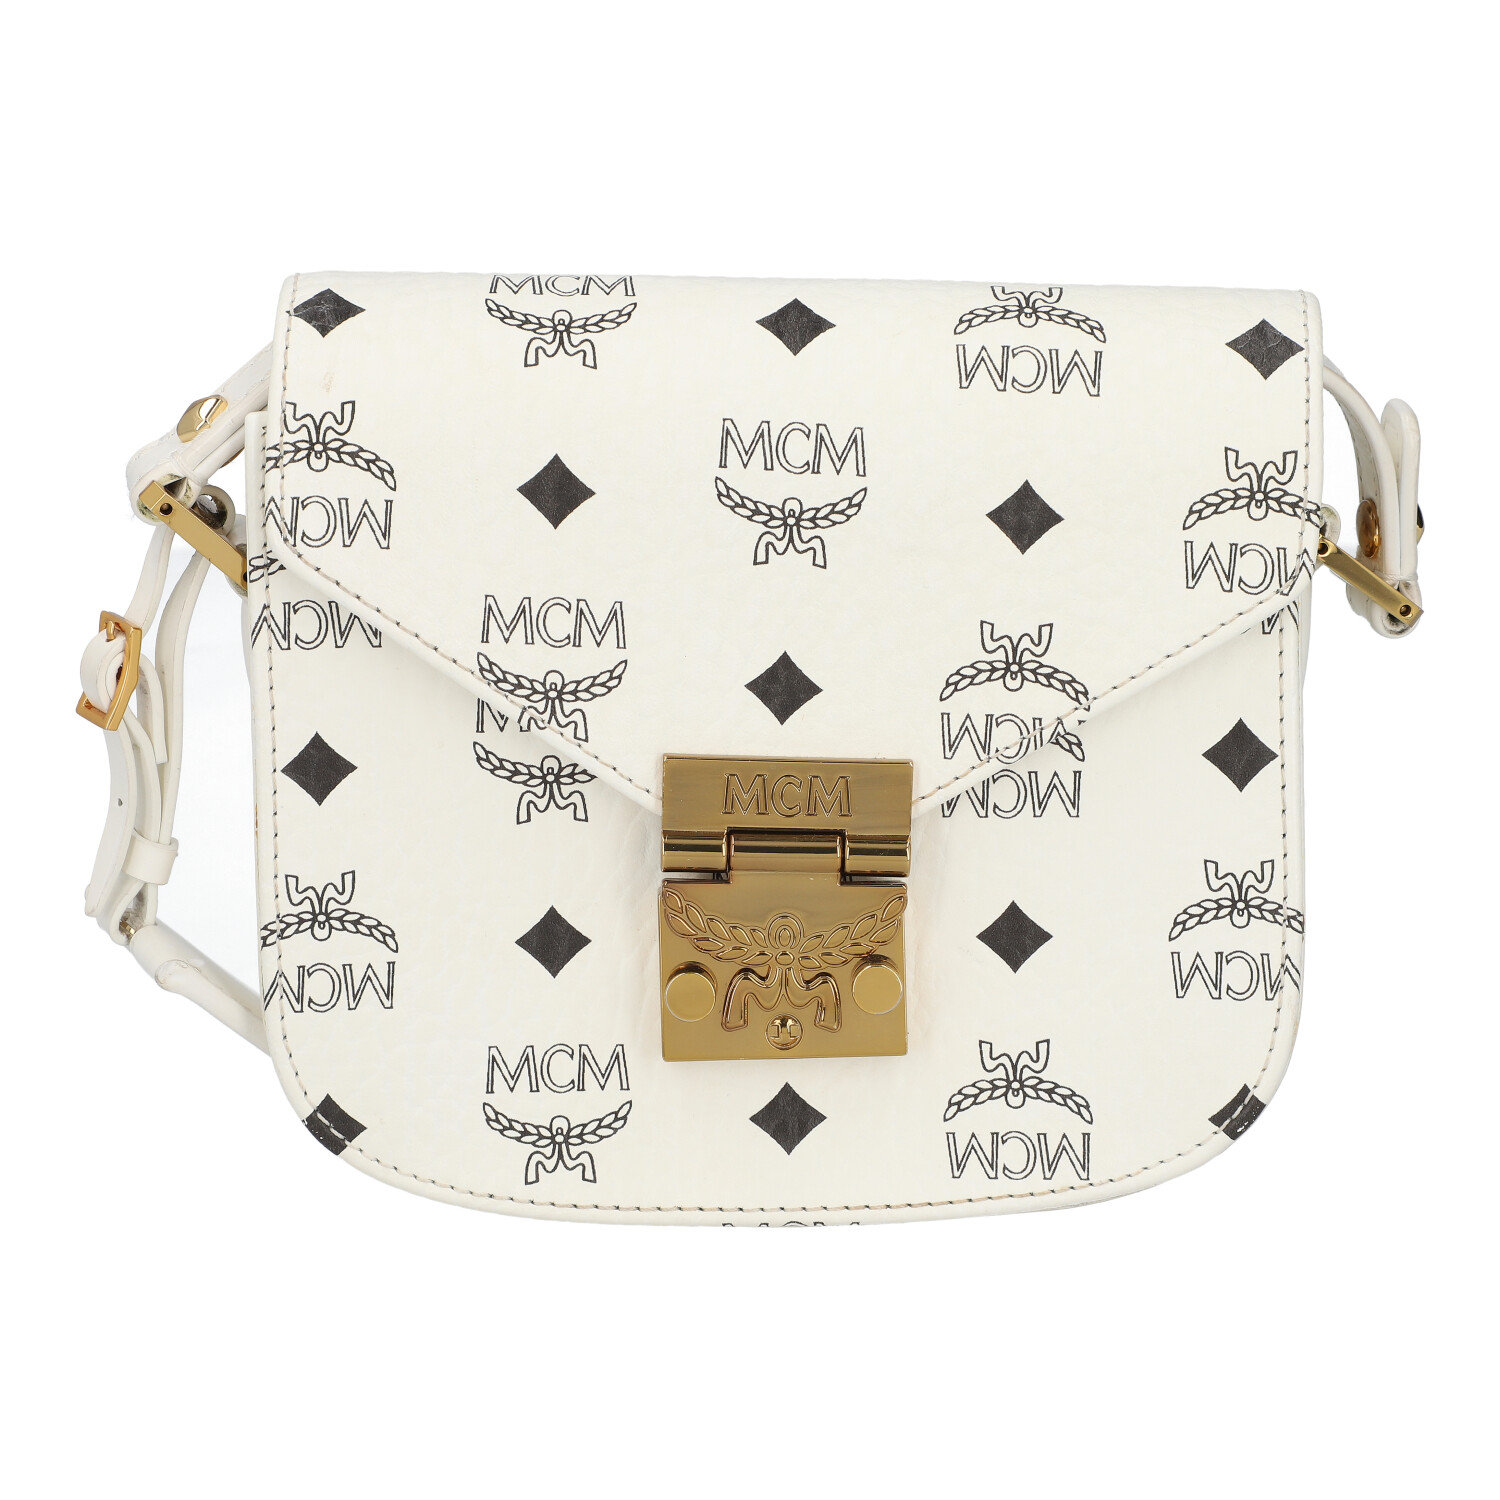 Sold at Auction: MCM Visetos Leather Crossbody Bag